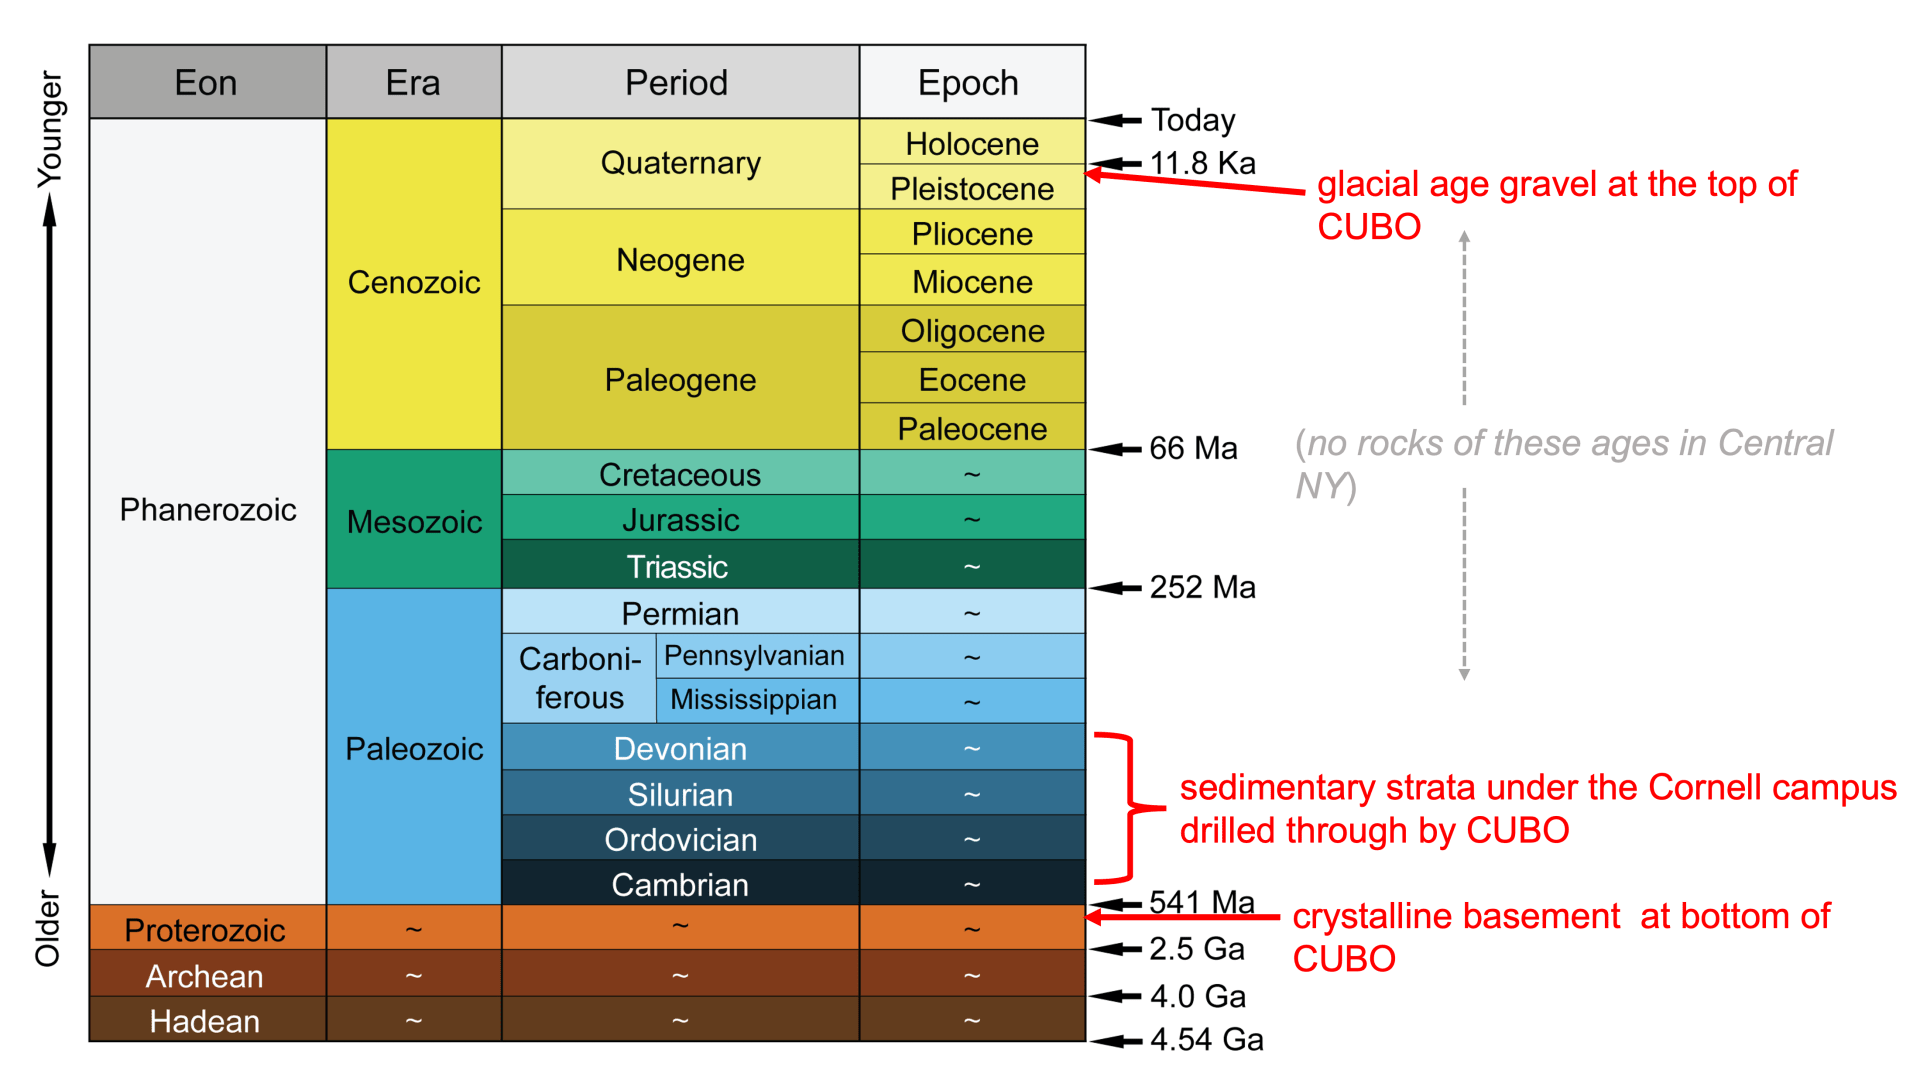 Geologic time scale showing three geologic intervals drilled by CUBO: late Pleistocene epoch, Cambrian to Devonian Period, and late Proterozoic Eon.